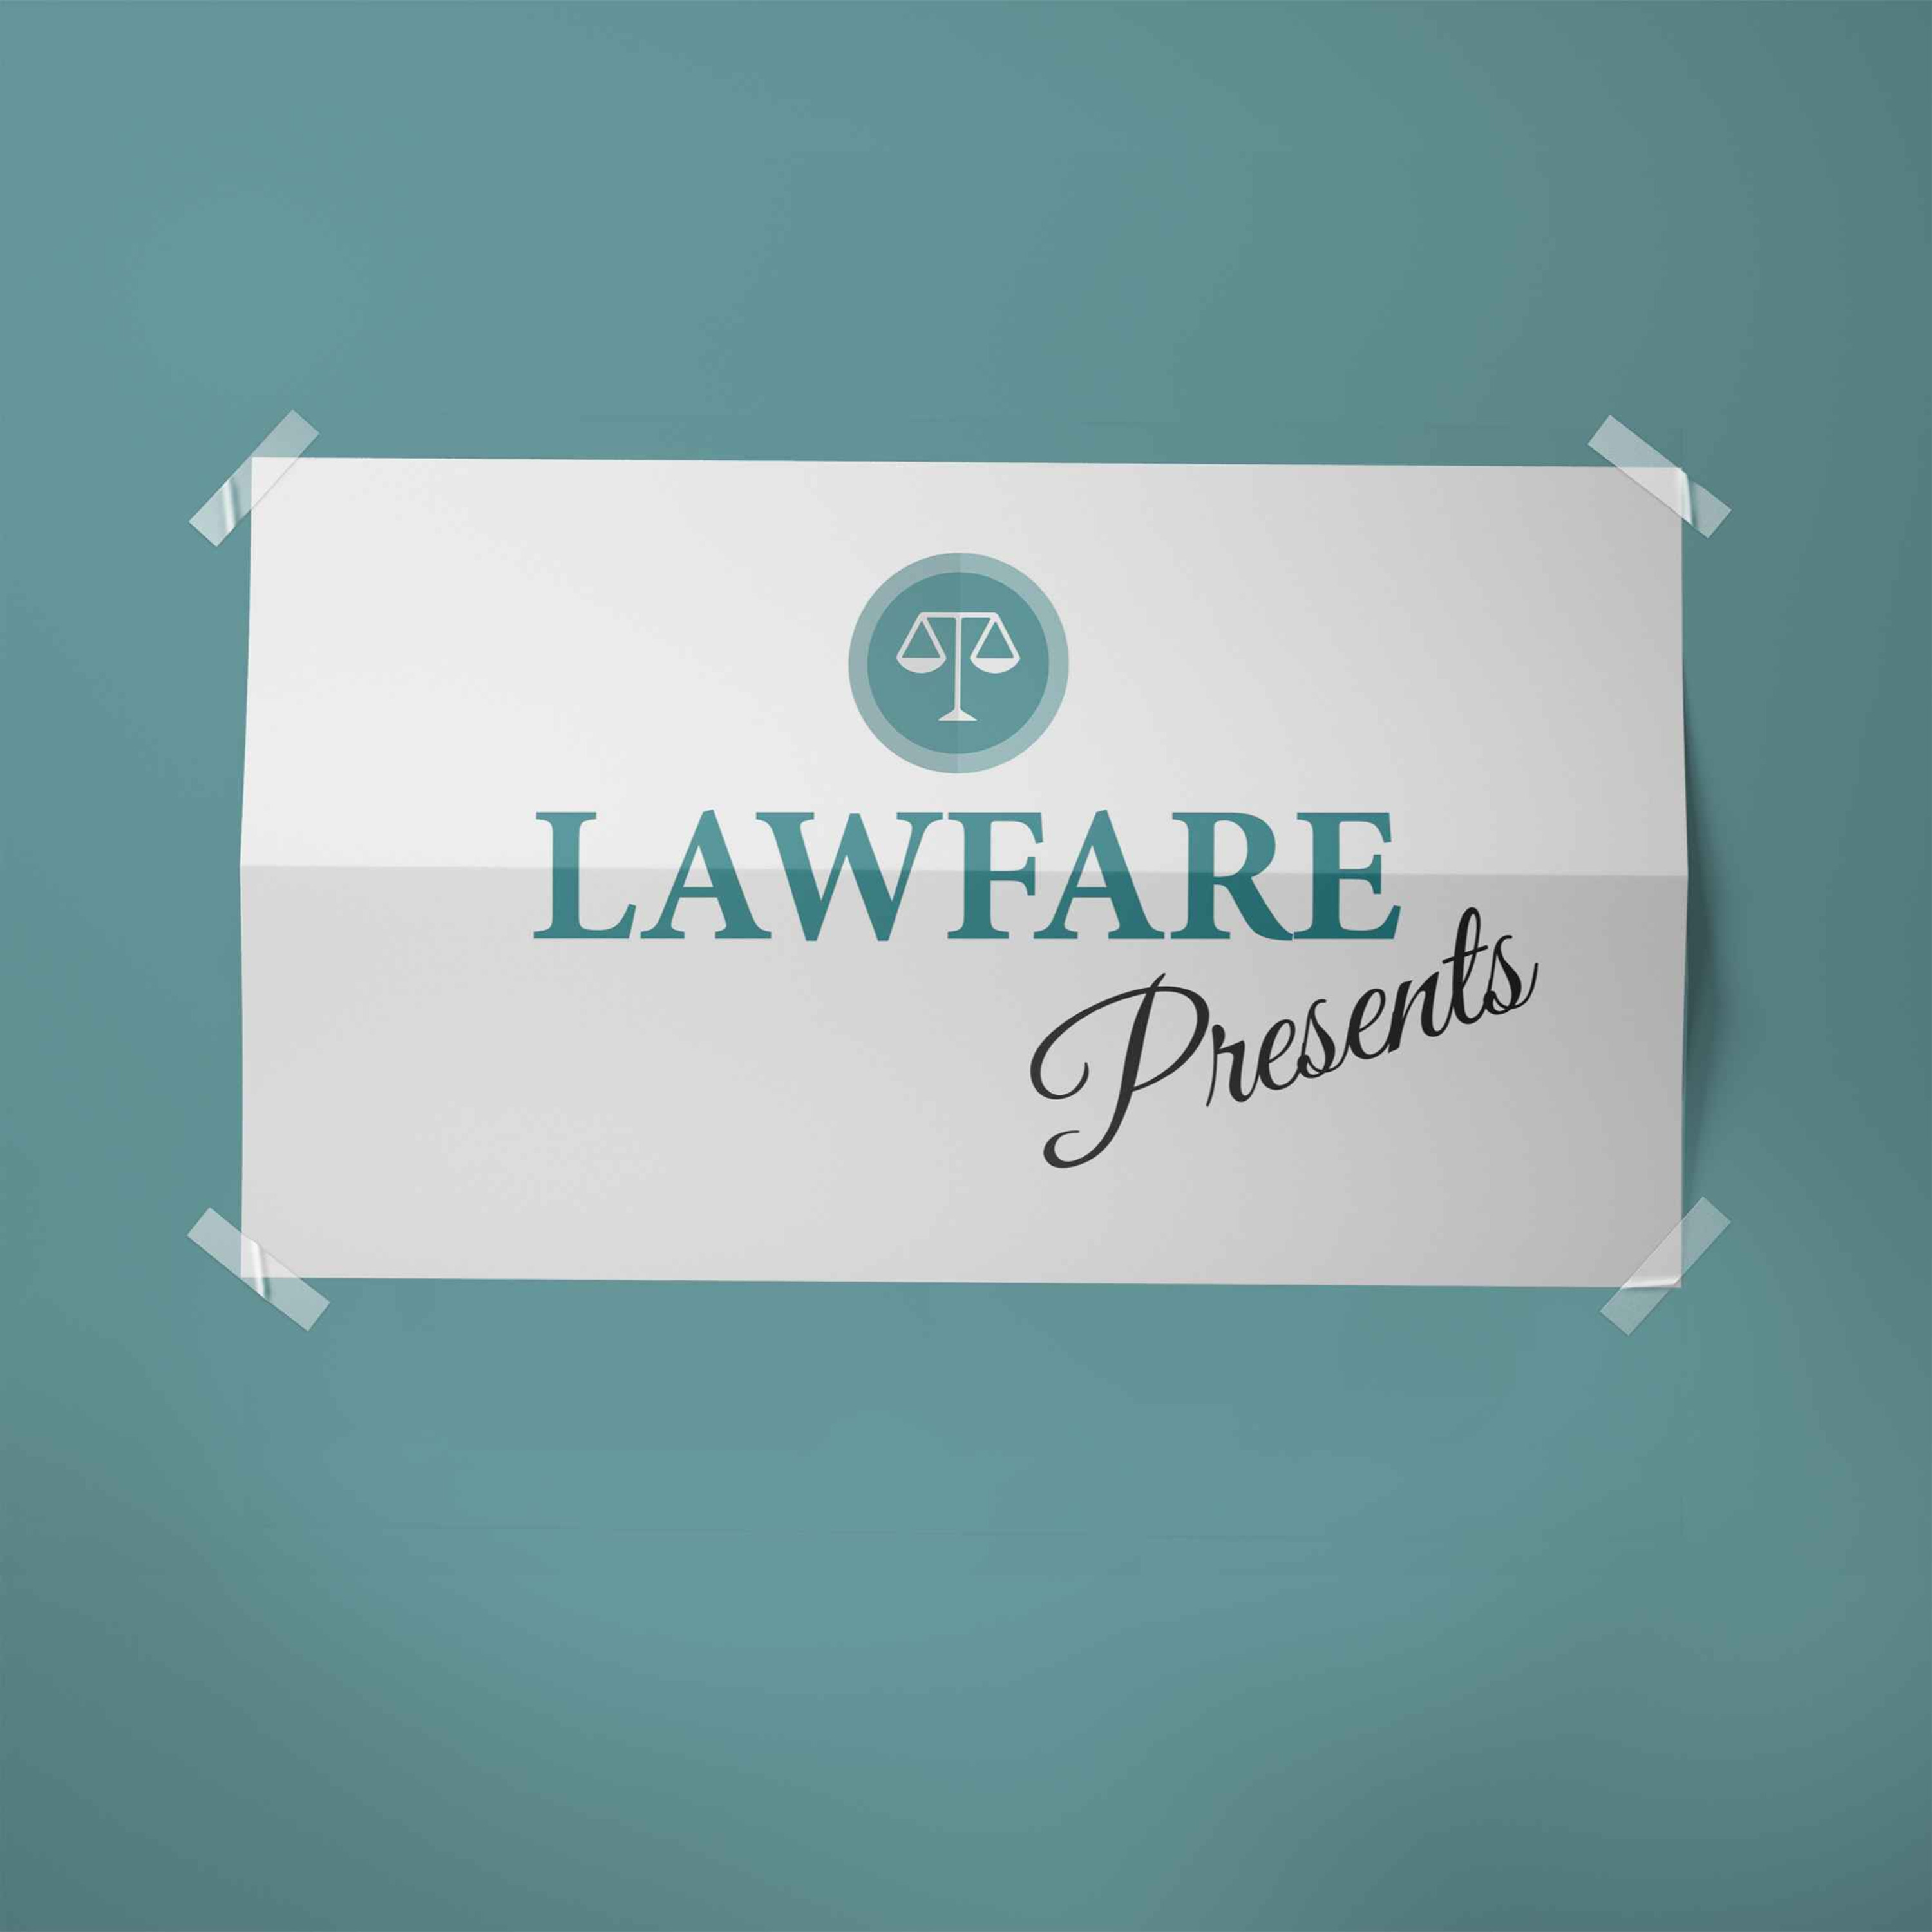 Lawfare Presents: Chatter, a new podcast from Shane Harris and David Priess